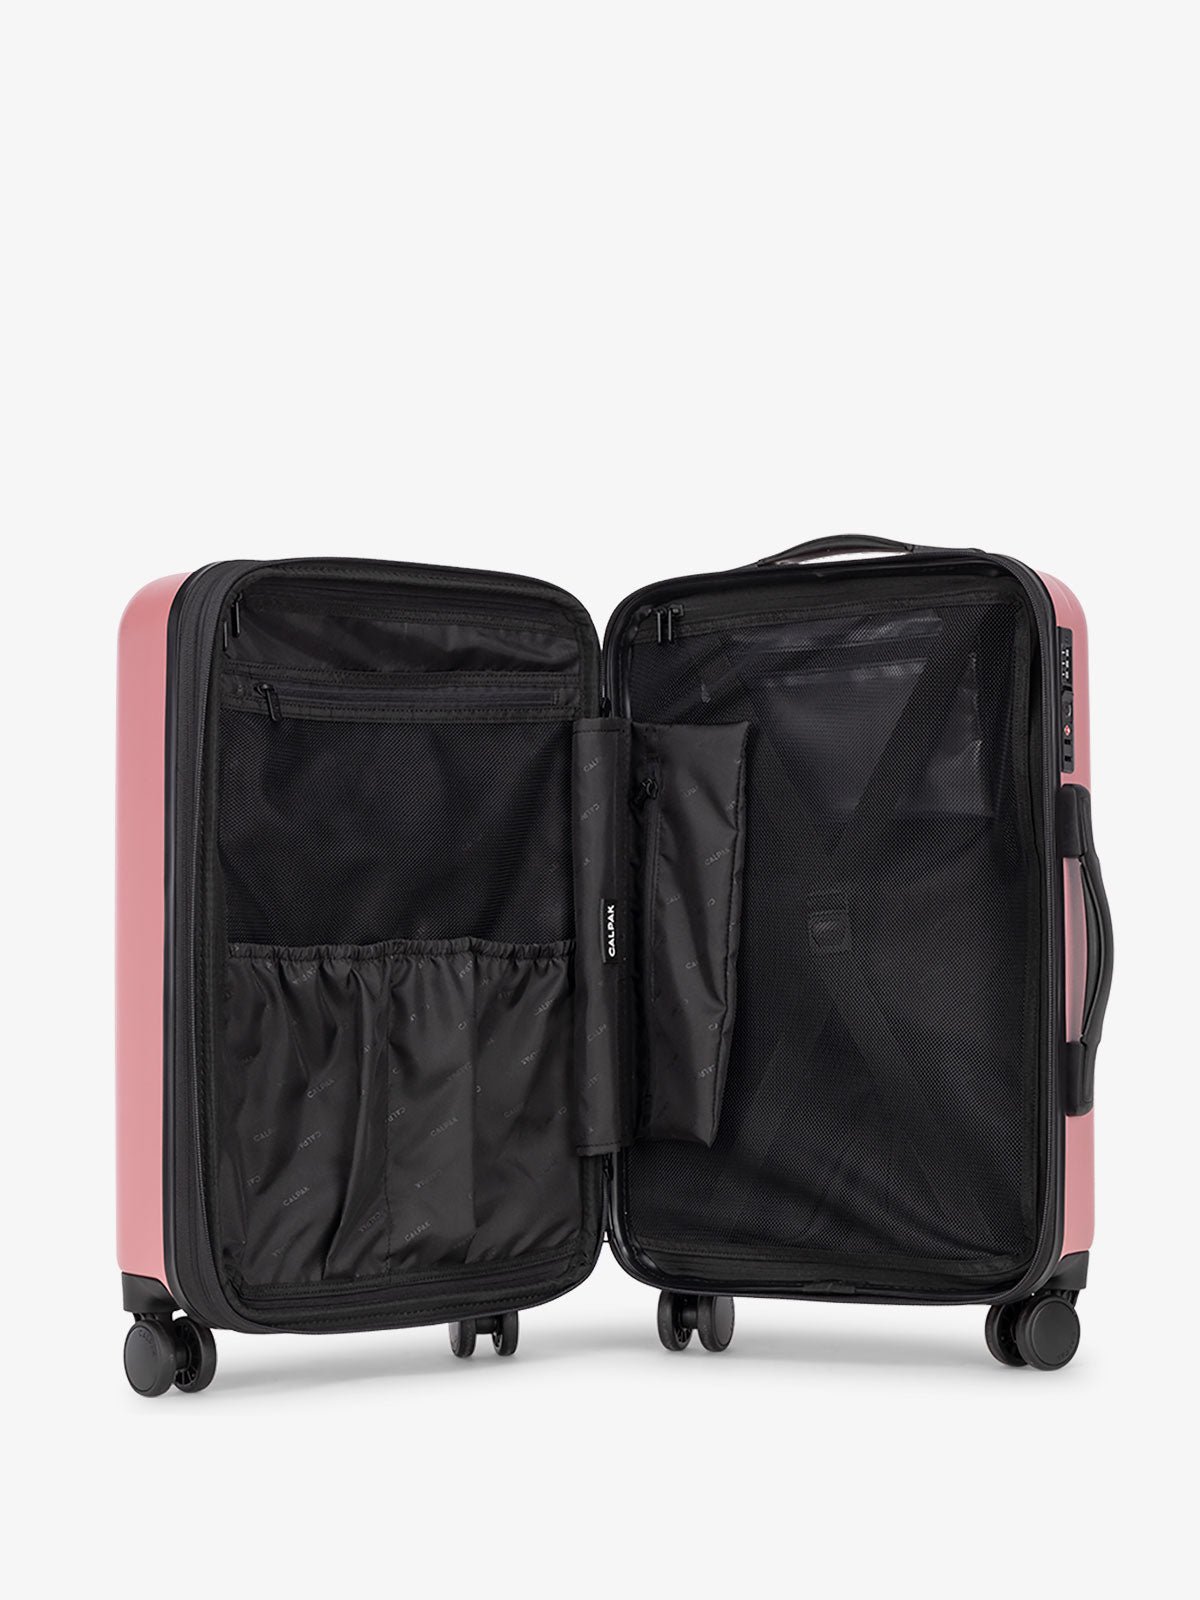 CALPAK Hard sided luggage bundle interior compartments and compression straps in pink